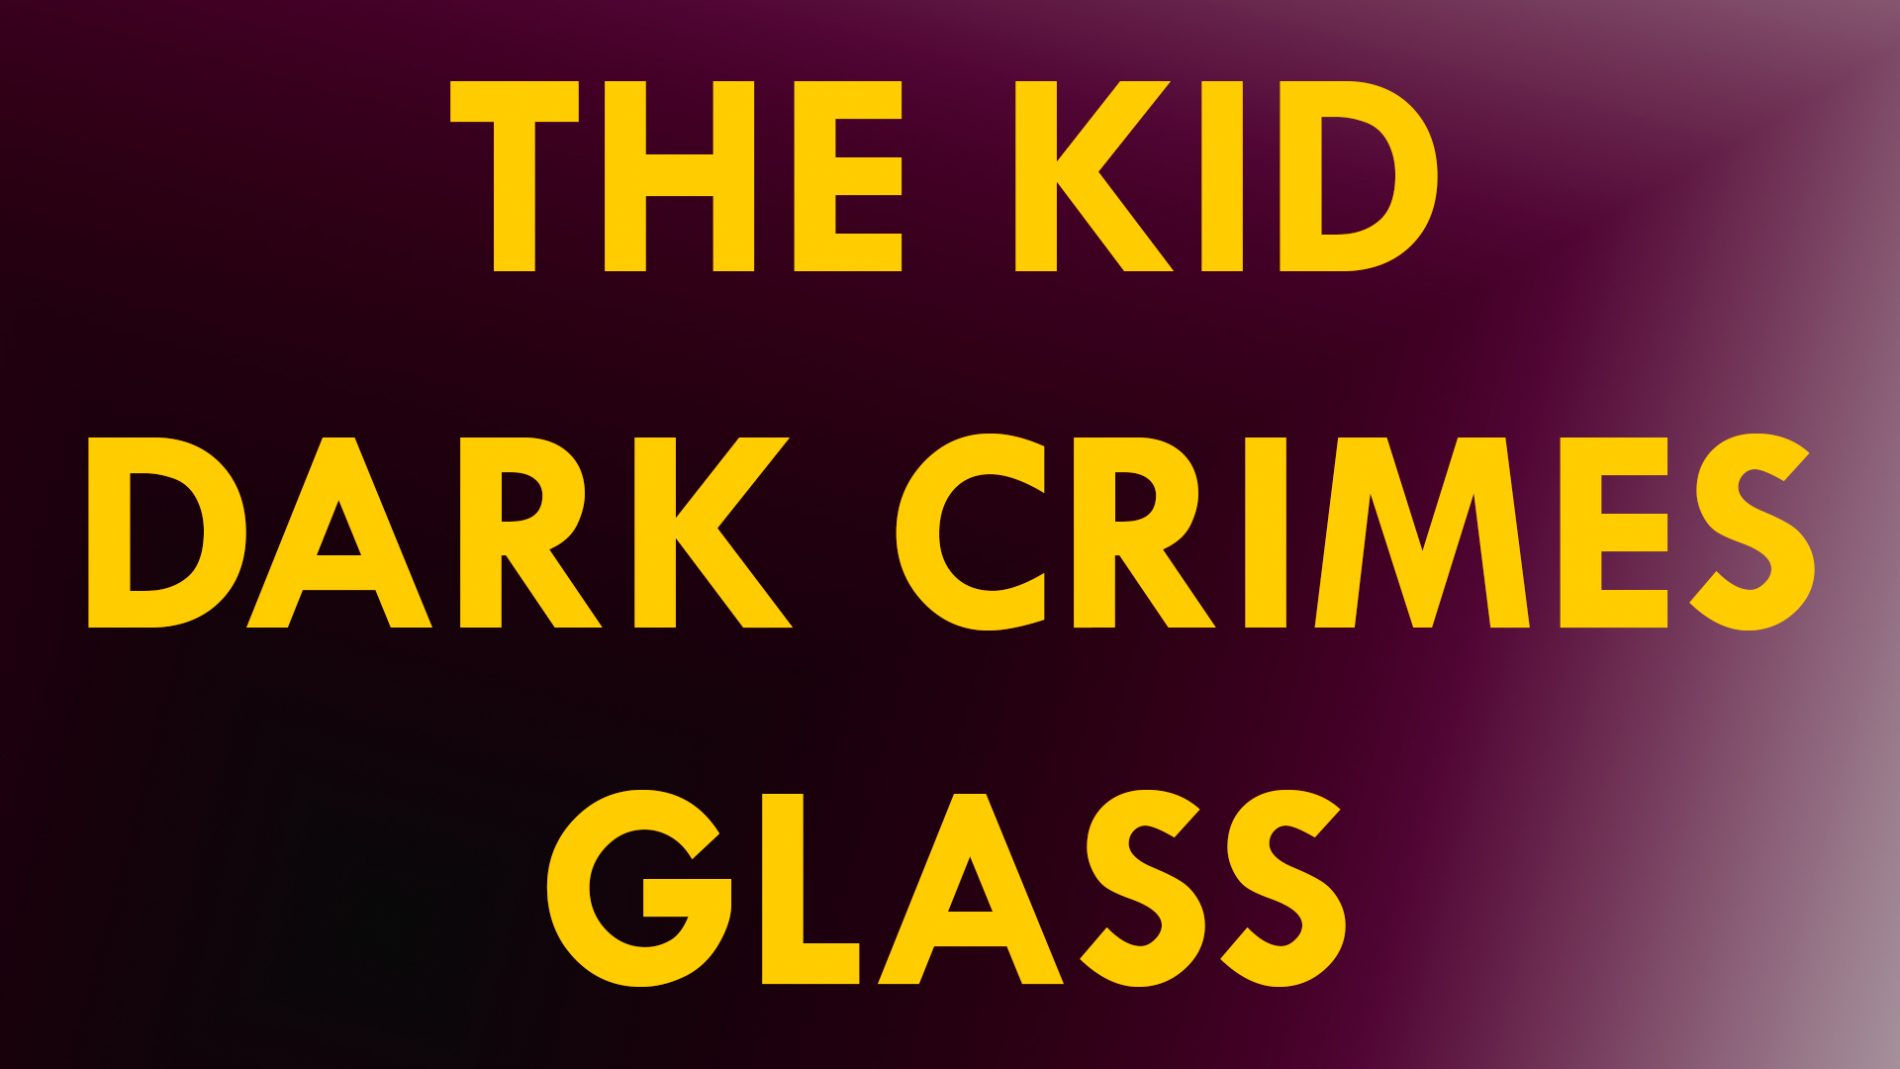 REVIEW: THE KID, DARK CRIMES Y GLASS